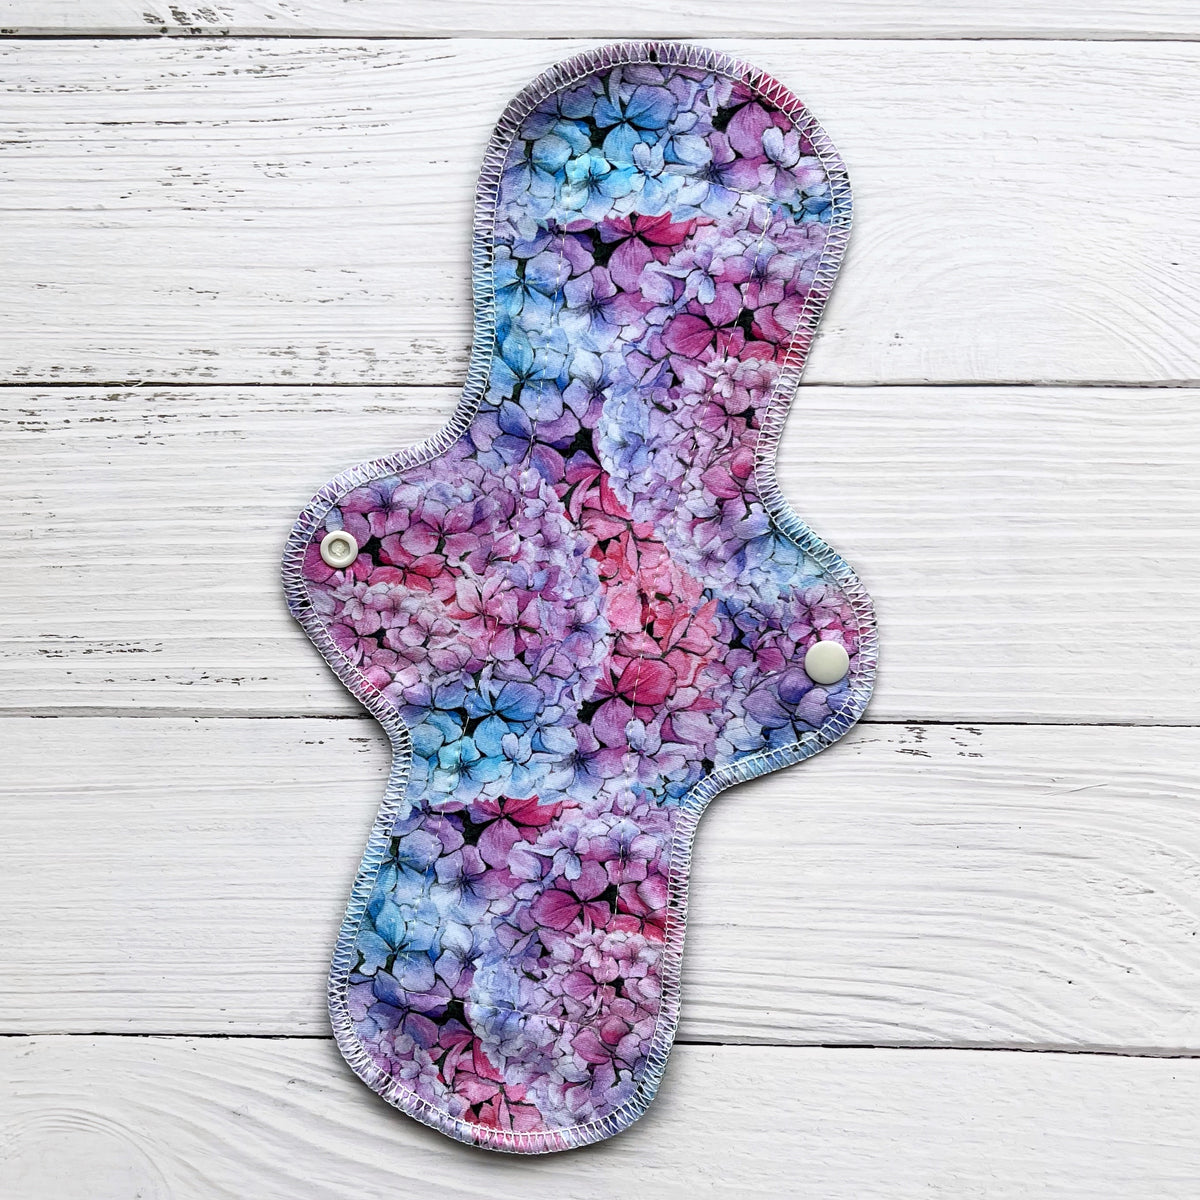 12 inch long reusable pad with a blue pink and purple hydrangea print on a rustic wood background